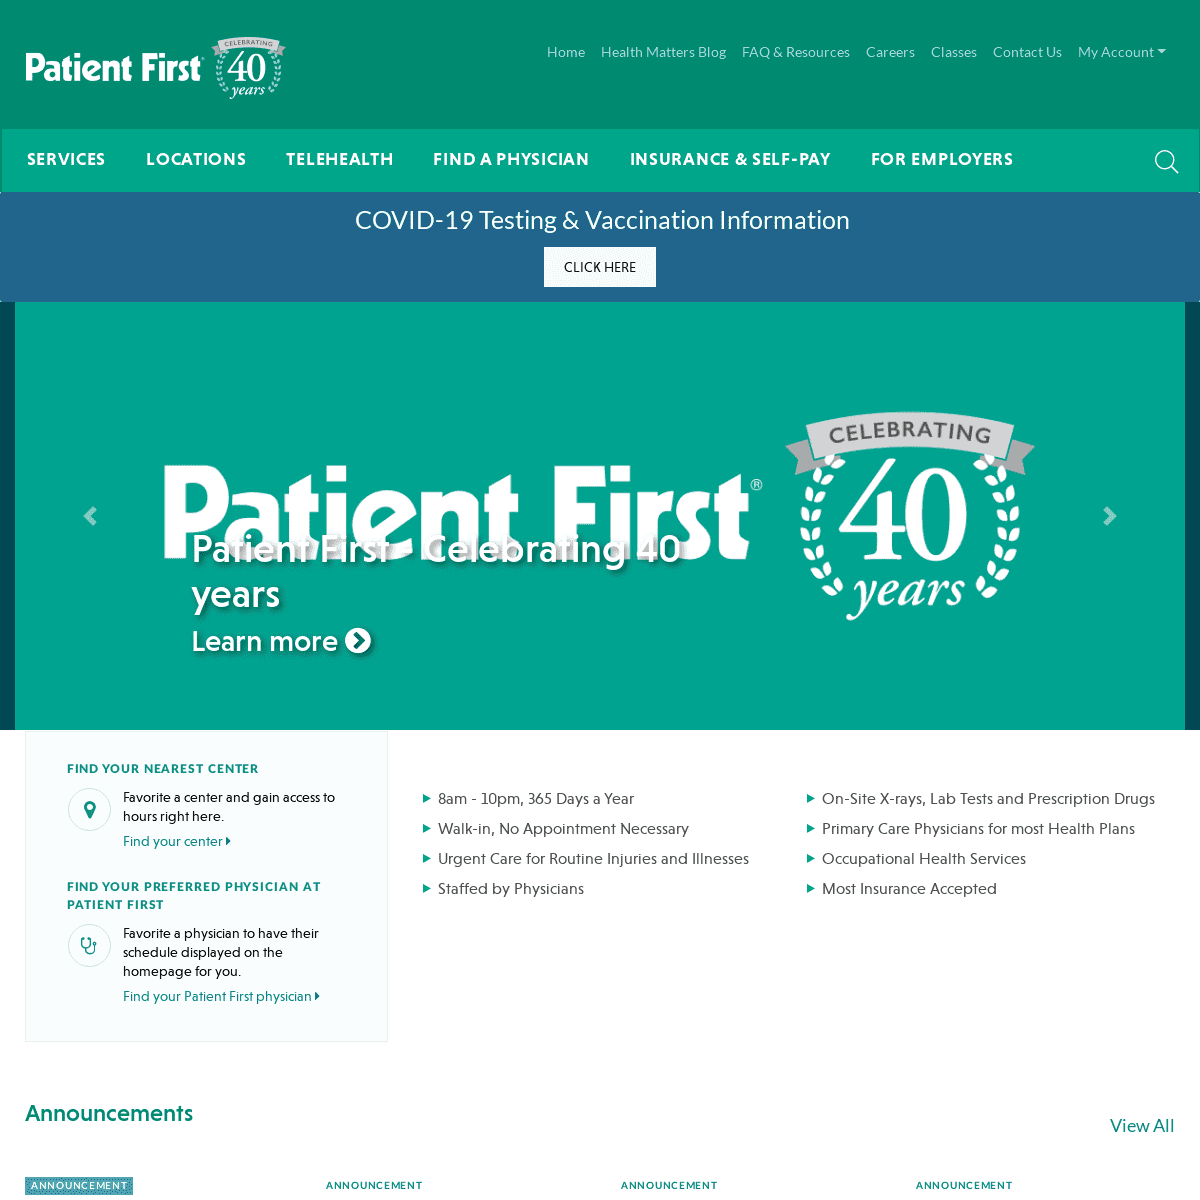 A complete backup of https://patientfirst.com